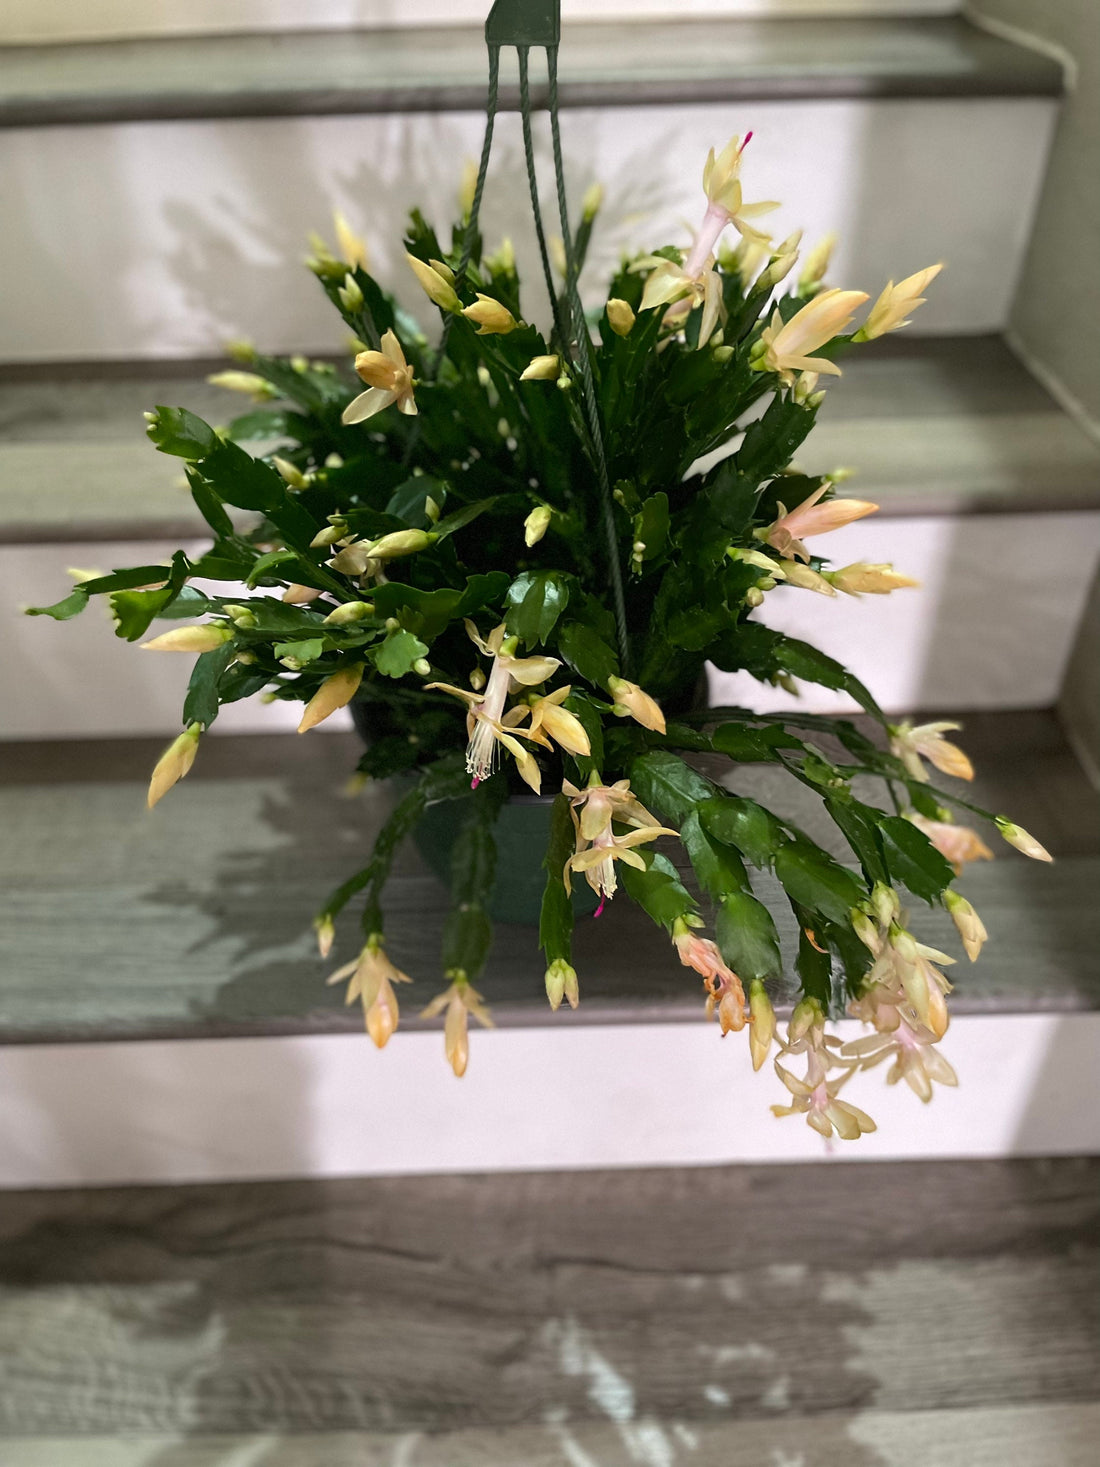 XXL 8 inch  pot-Schlumbergera truncata -Holiday  Cactus - yellow flowers -lime light dancer -rare hard to find this size blooming as of 12/4